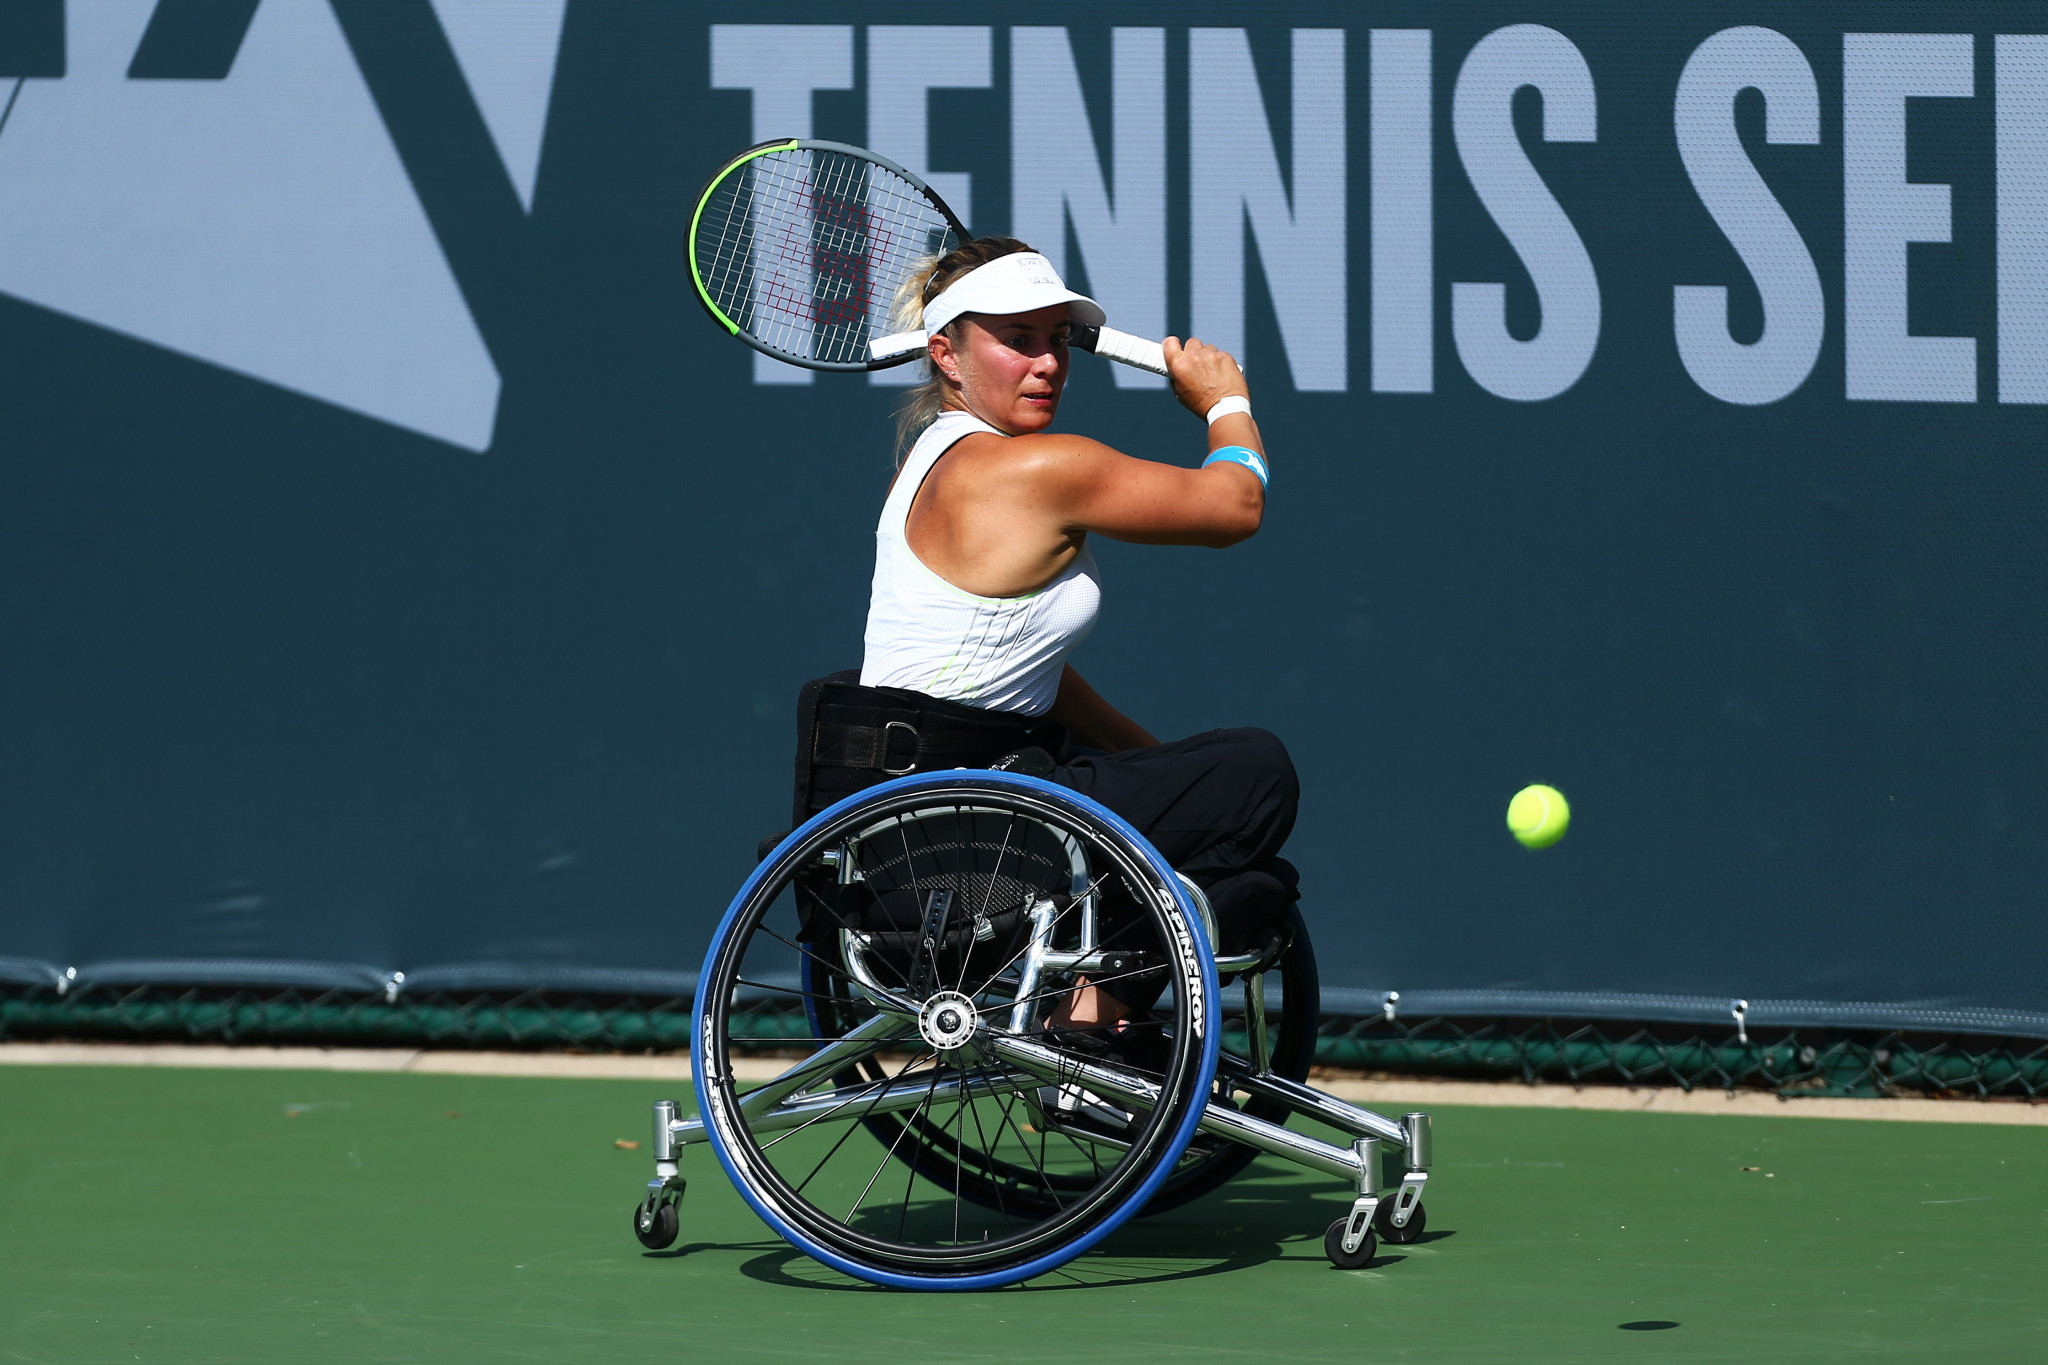 Britain's Lucy Shuker is set to serve another two-year term after joining the Wheelchair Tennis Player Council when it was formed in 2018 ©Getty Images